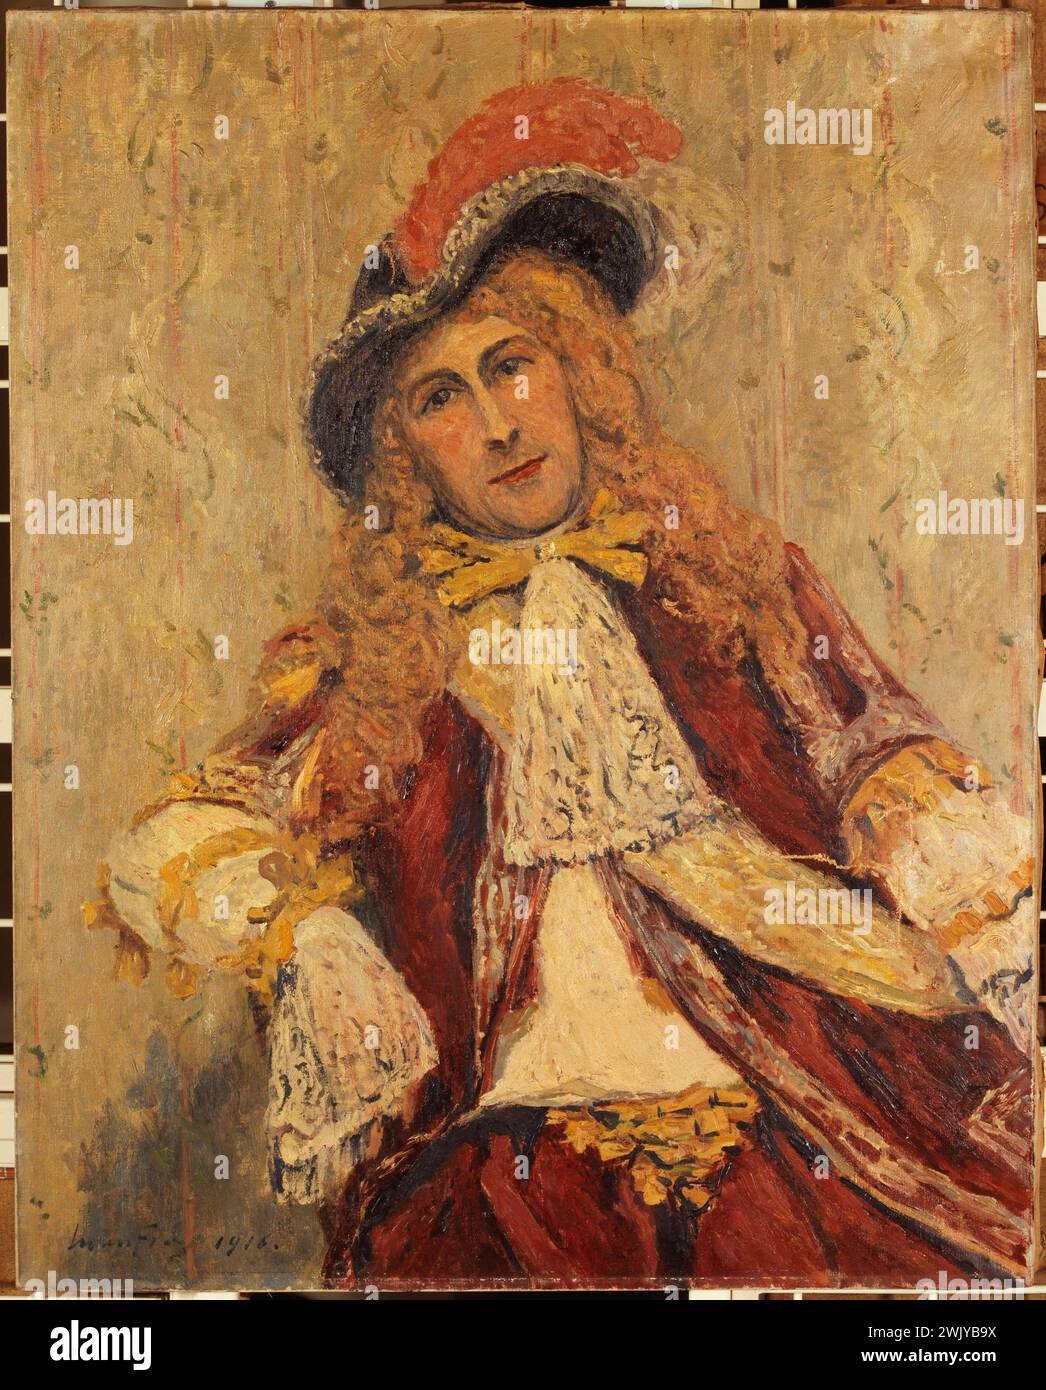 Maxime Maufra (1861-1918). 'Émile Dehelly (1871-1969), member of the Comédie-Française, in stage costume'. Oil on canvas. 1916. Paris, Carnavalet museum. 76108-11 French actor, Comedie-Francaise, Scene suit, canvas oil, portrait, societary, hat Stock Photo